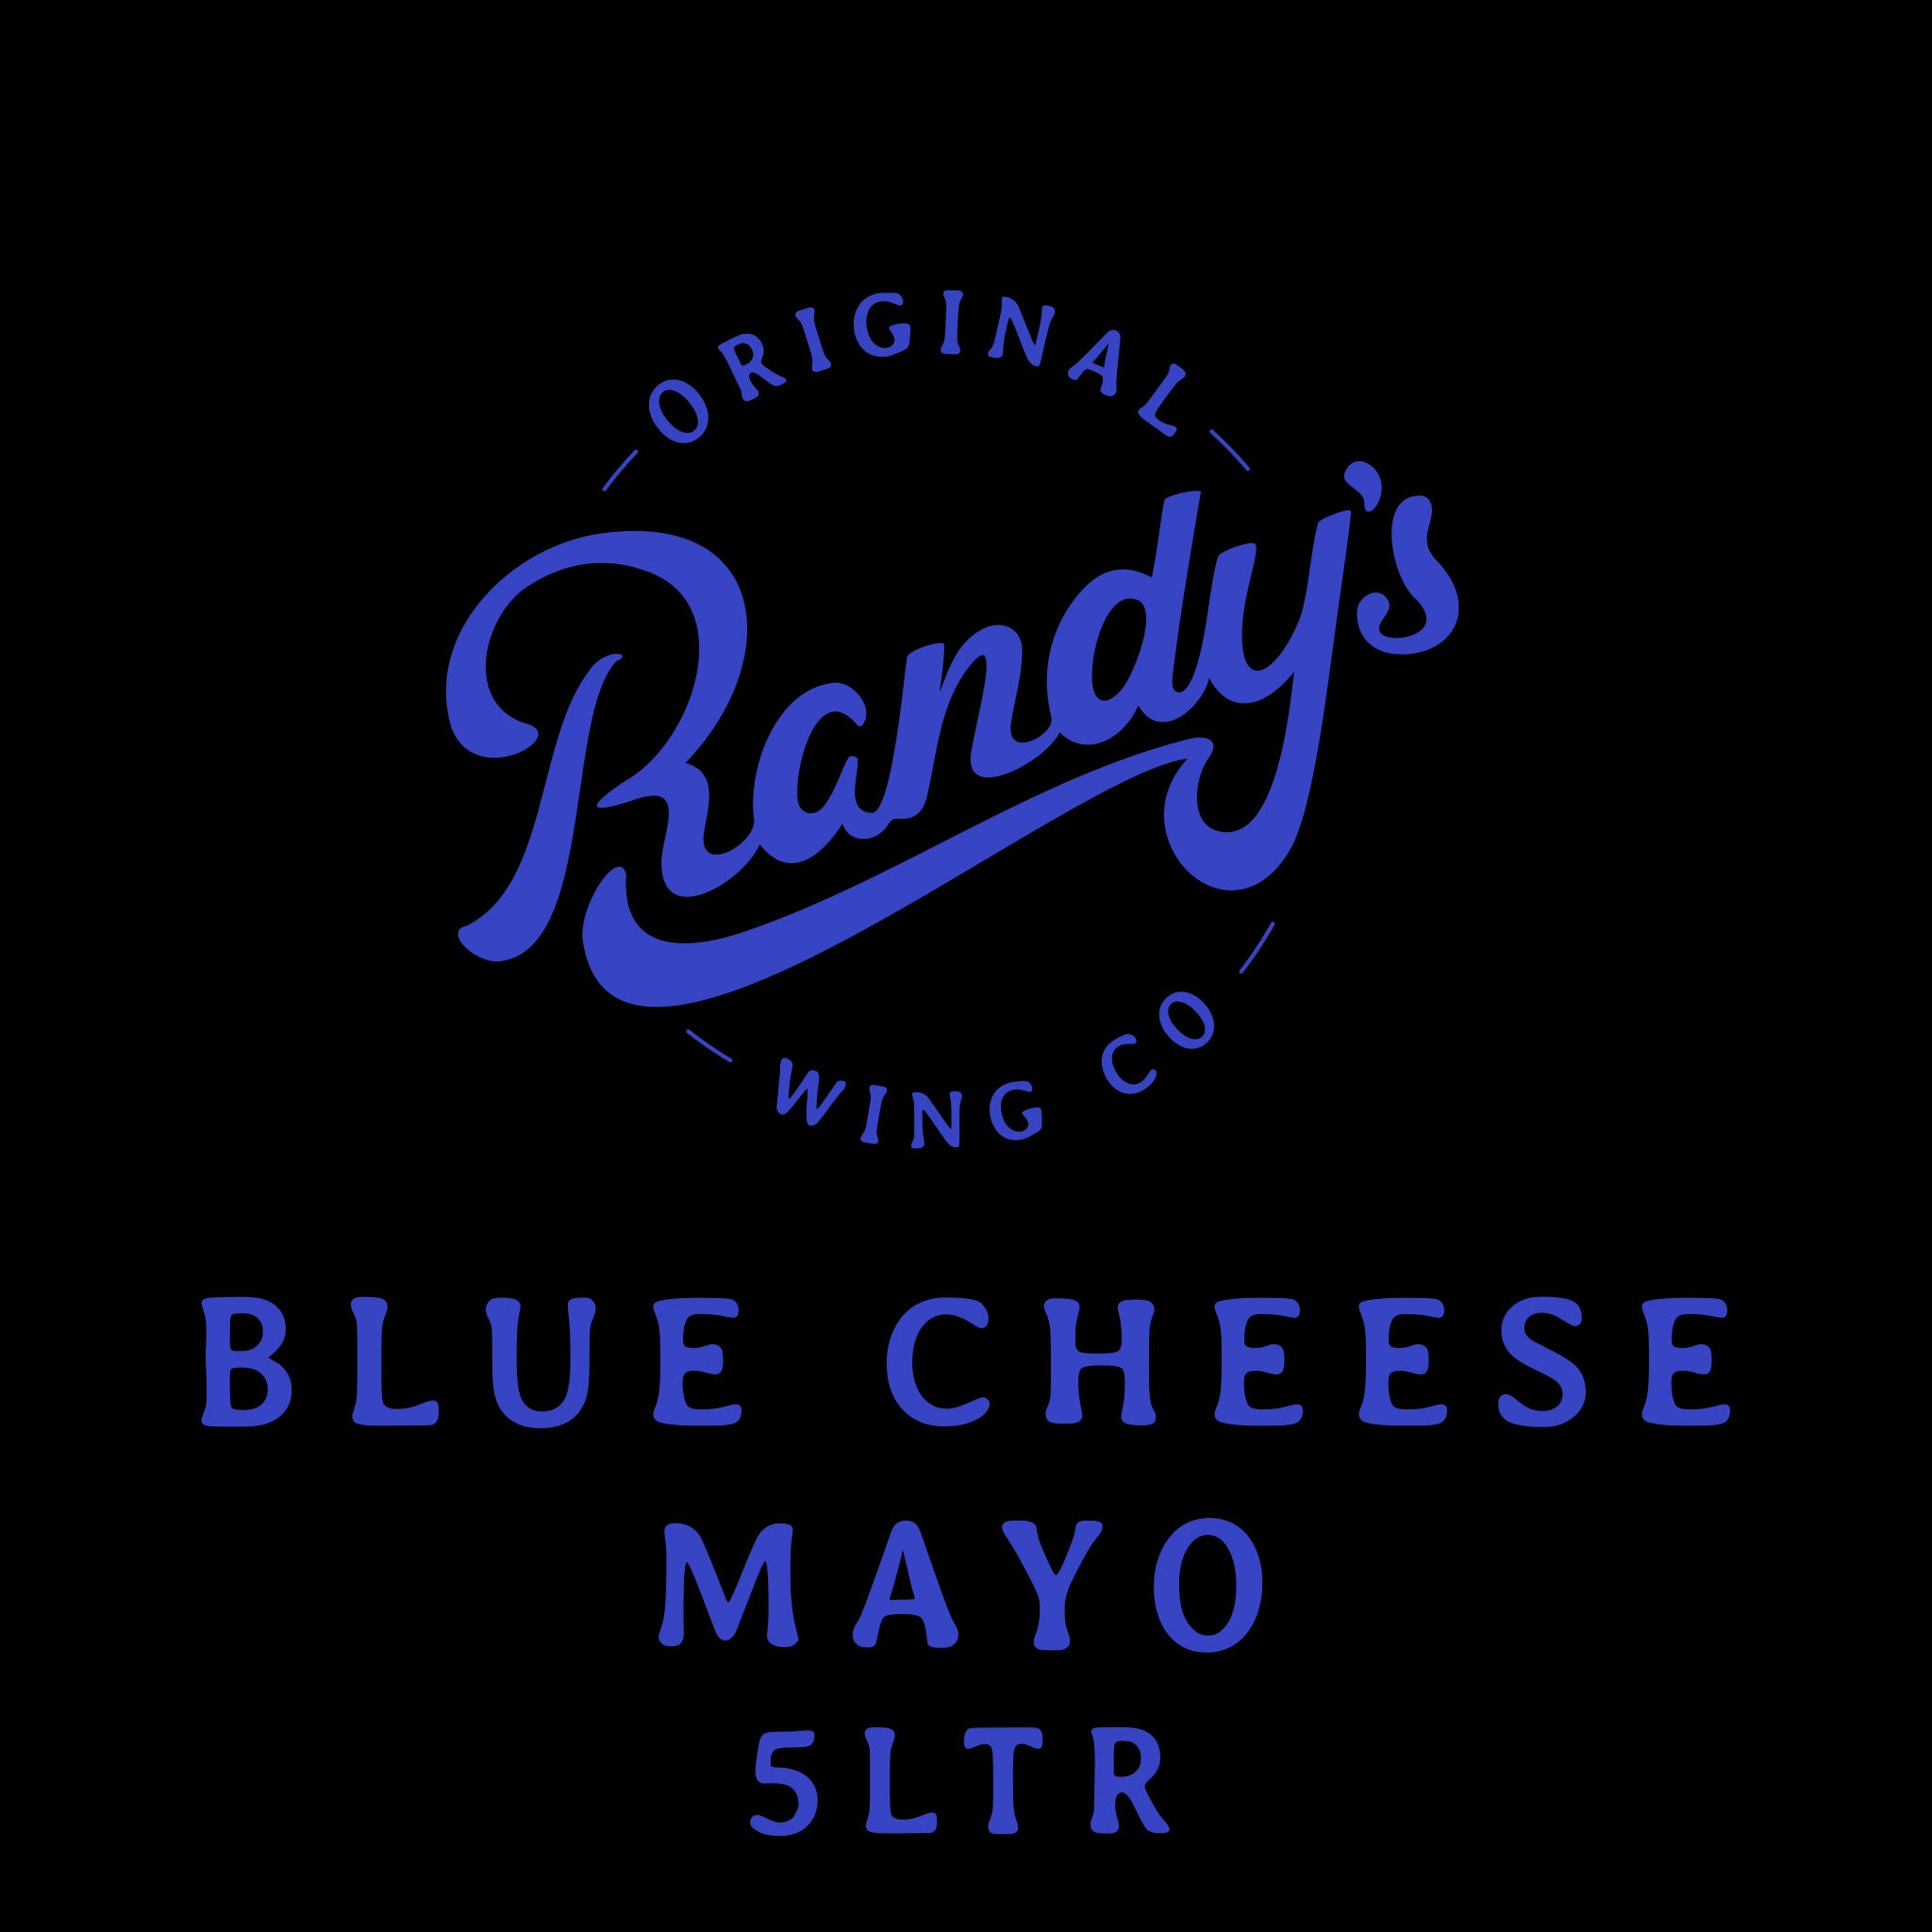 Randy's Blue Cheese Mayo - 5ltr & 4x1ltr